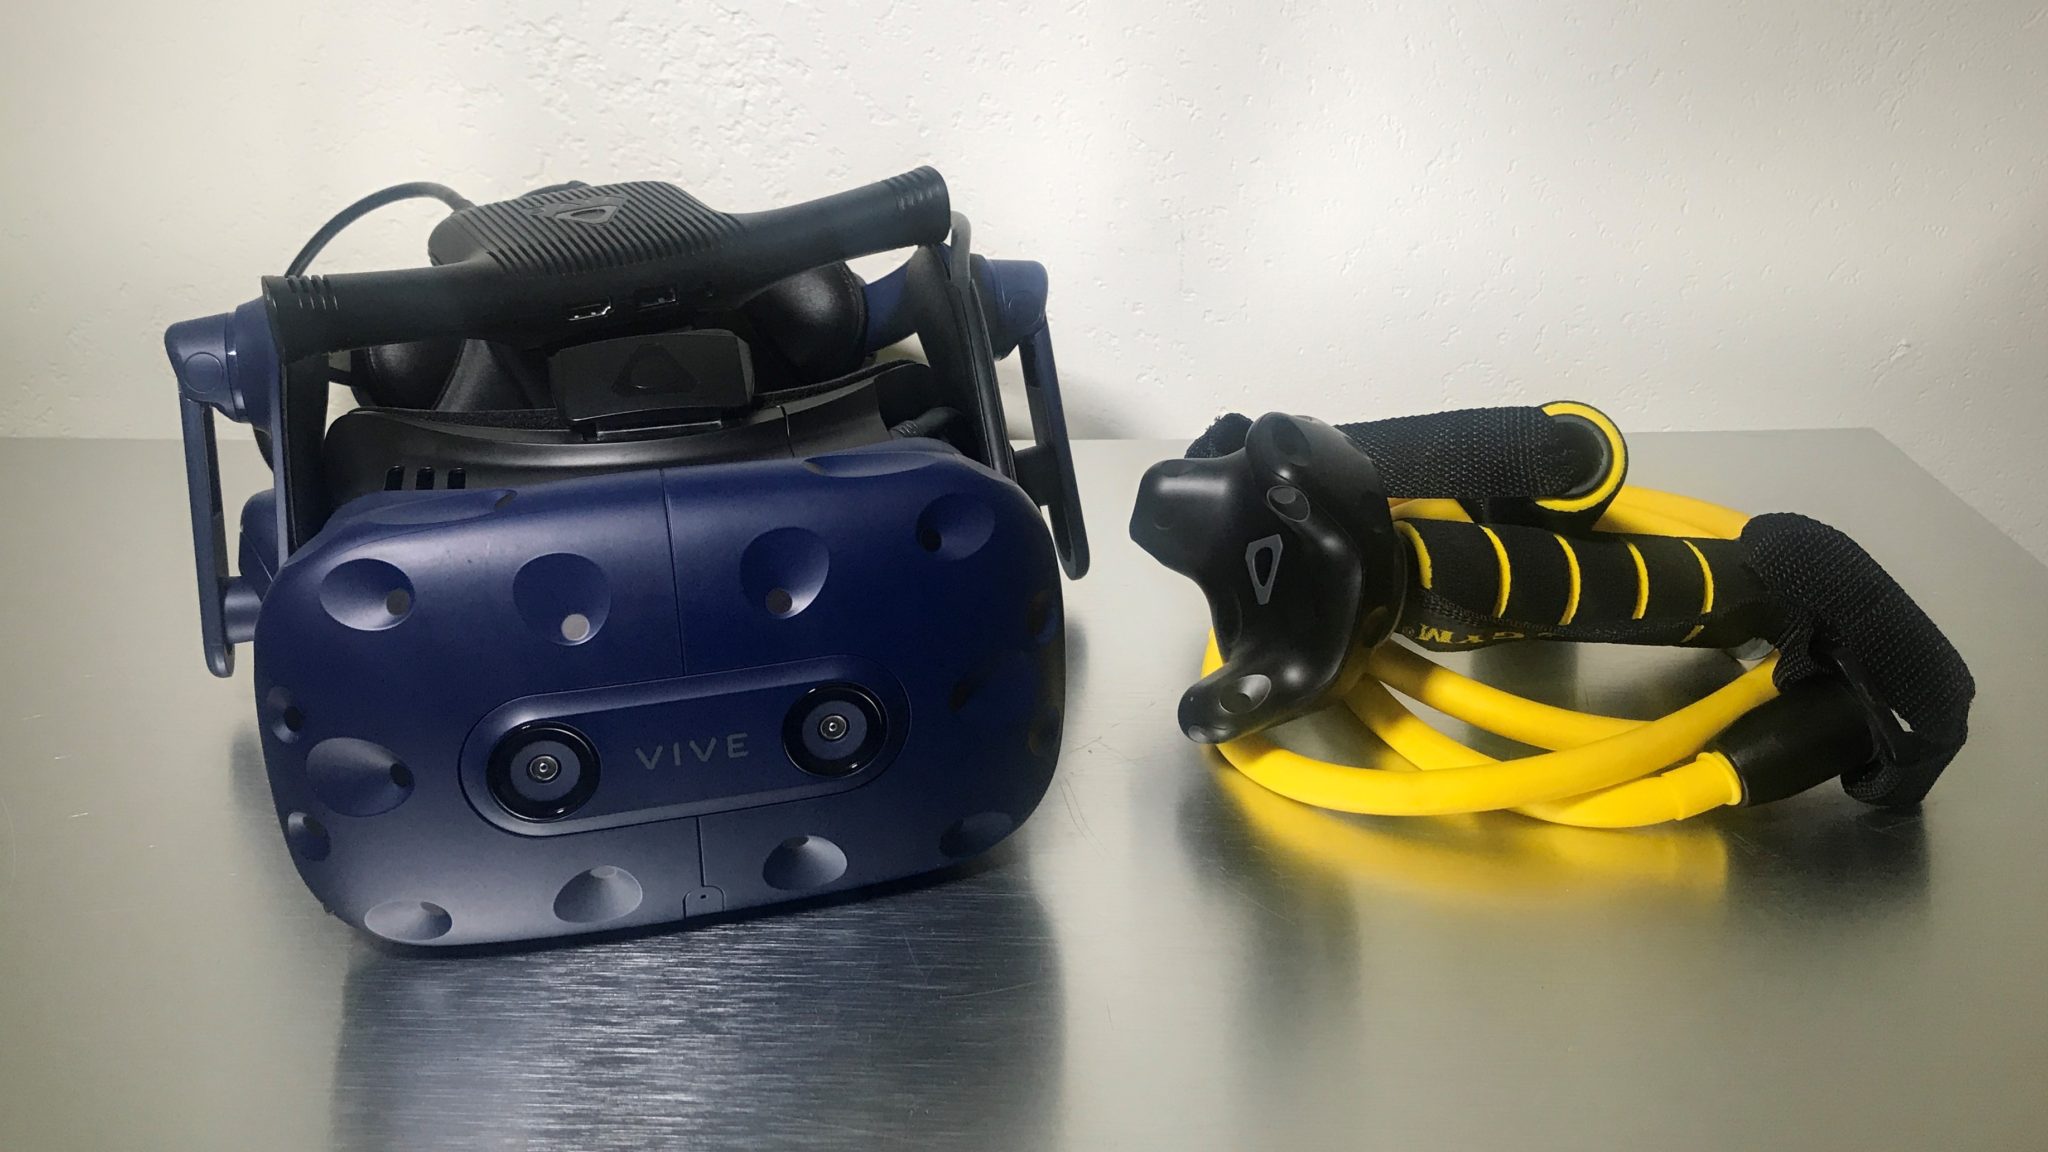 HTC Vive Pro with Tracker on a resistance band